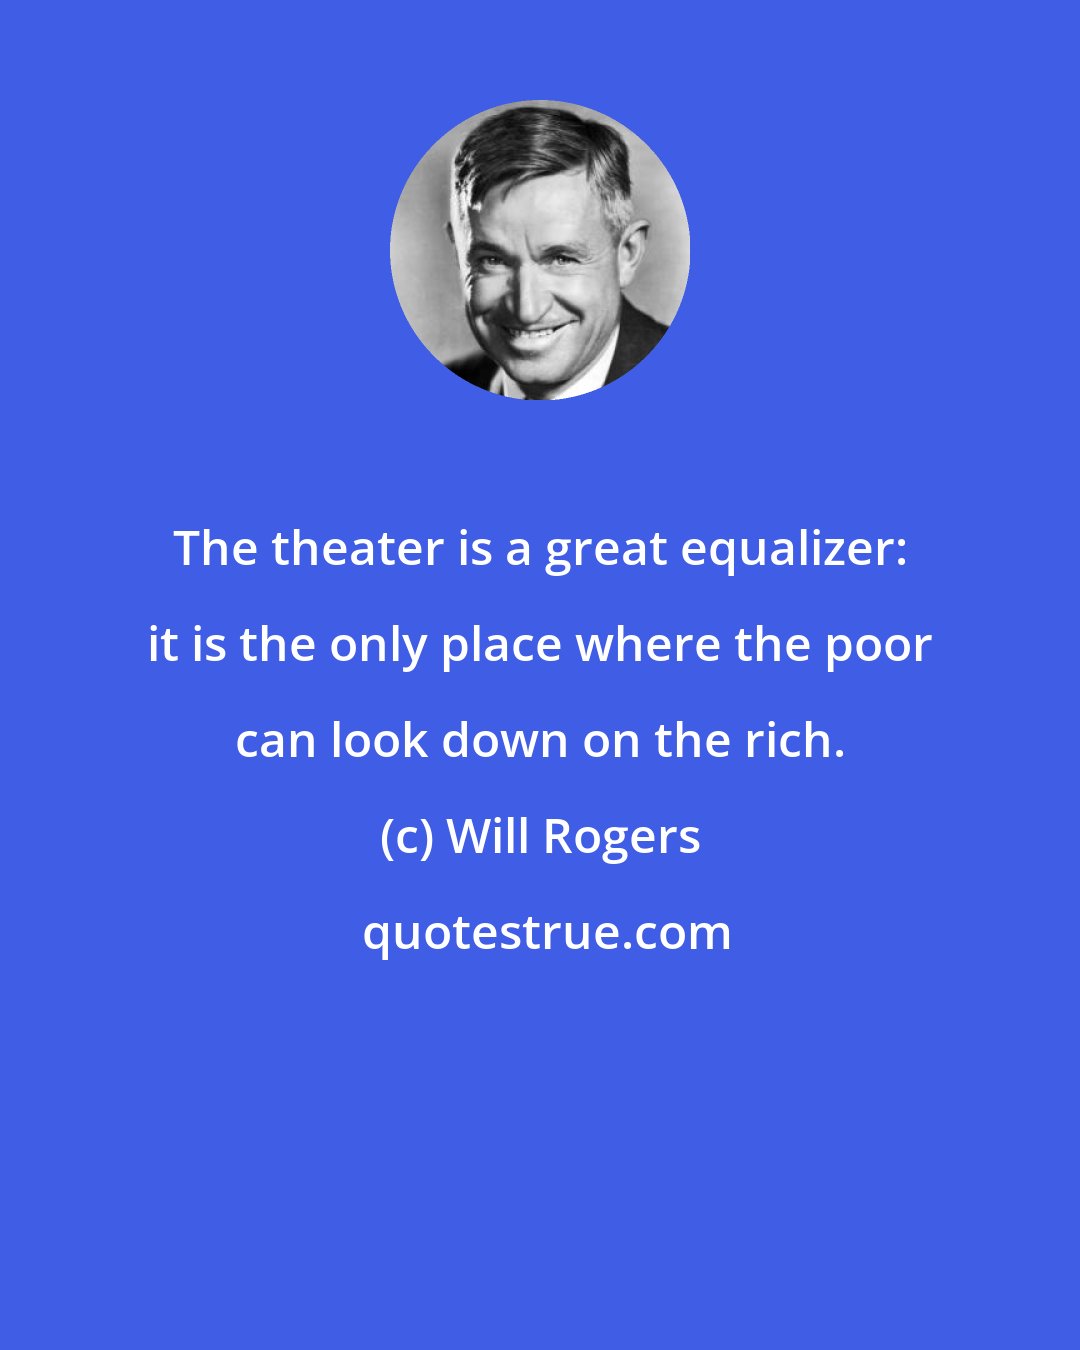 Will Rogers: The theater is a great equalizer: it is the only place where the poor can look down on the rich.